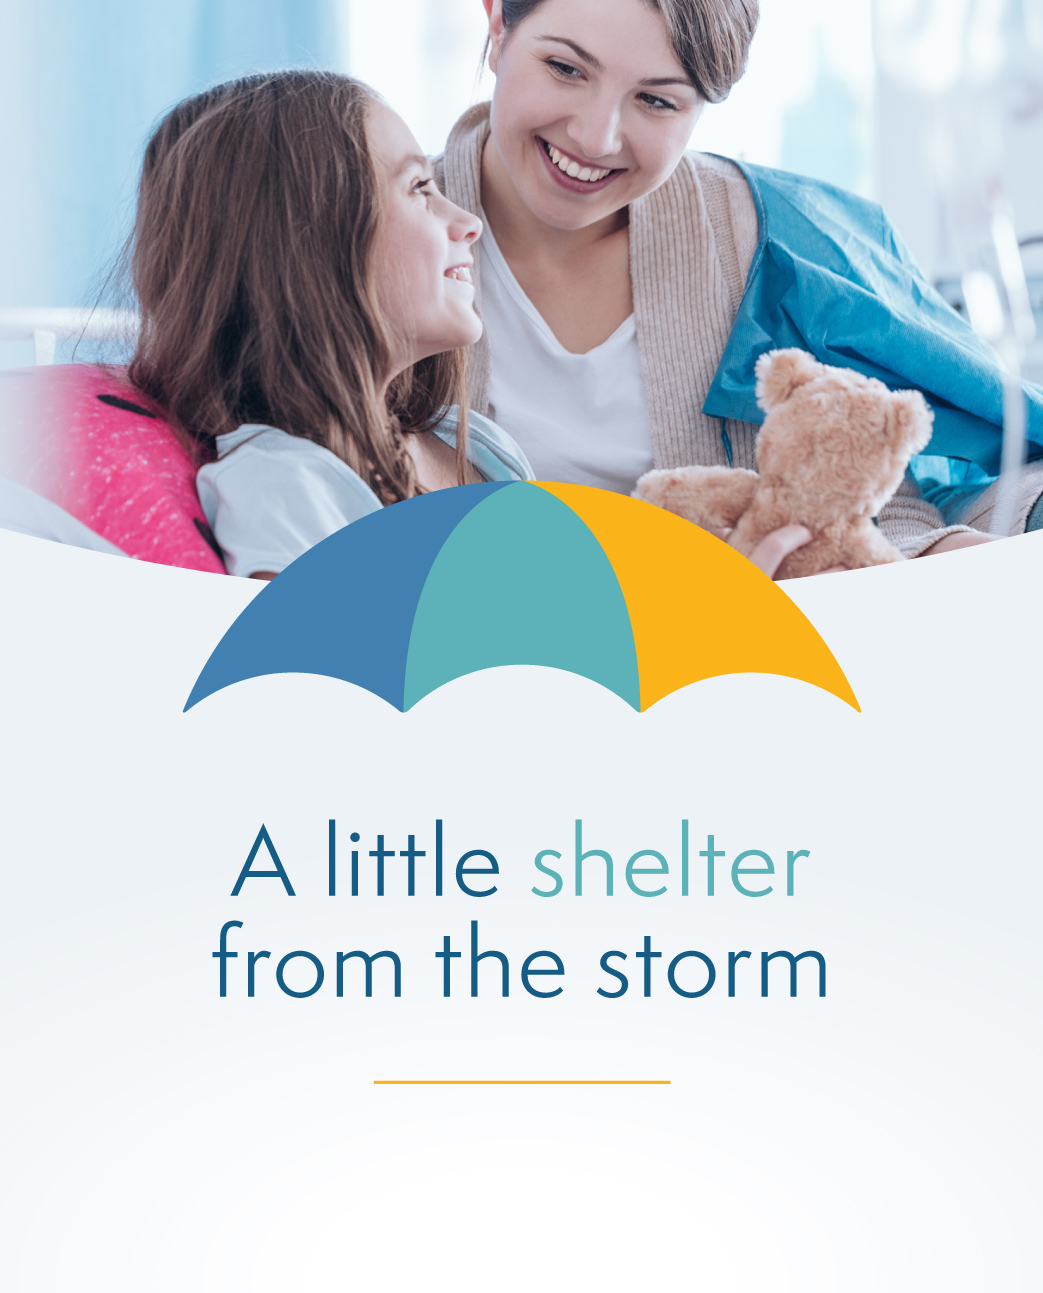 Helping Families Handle Cancer - A little shelter from the storm